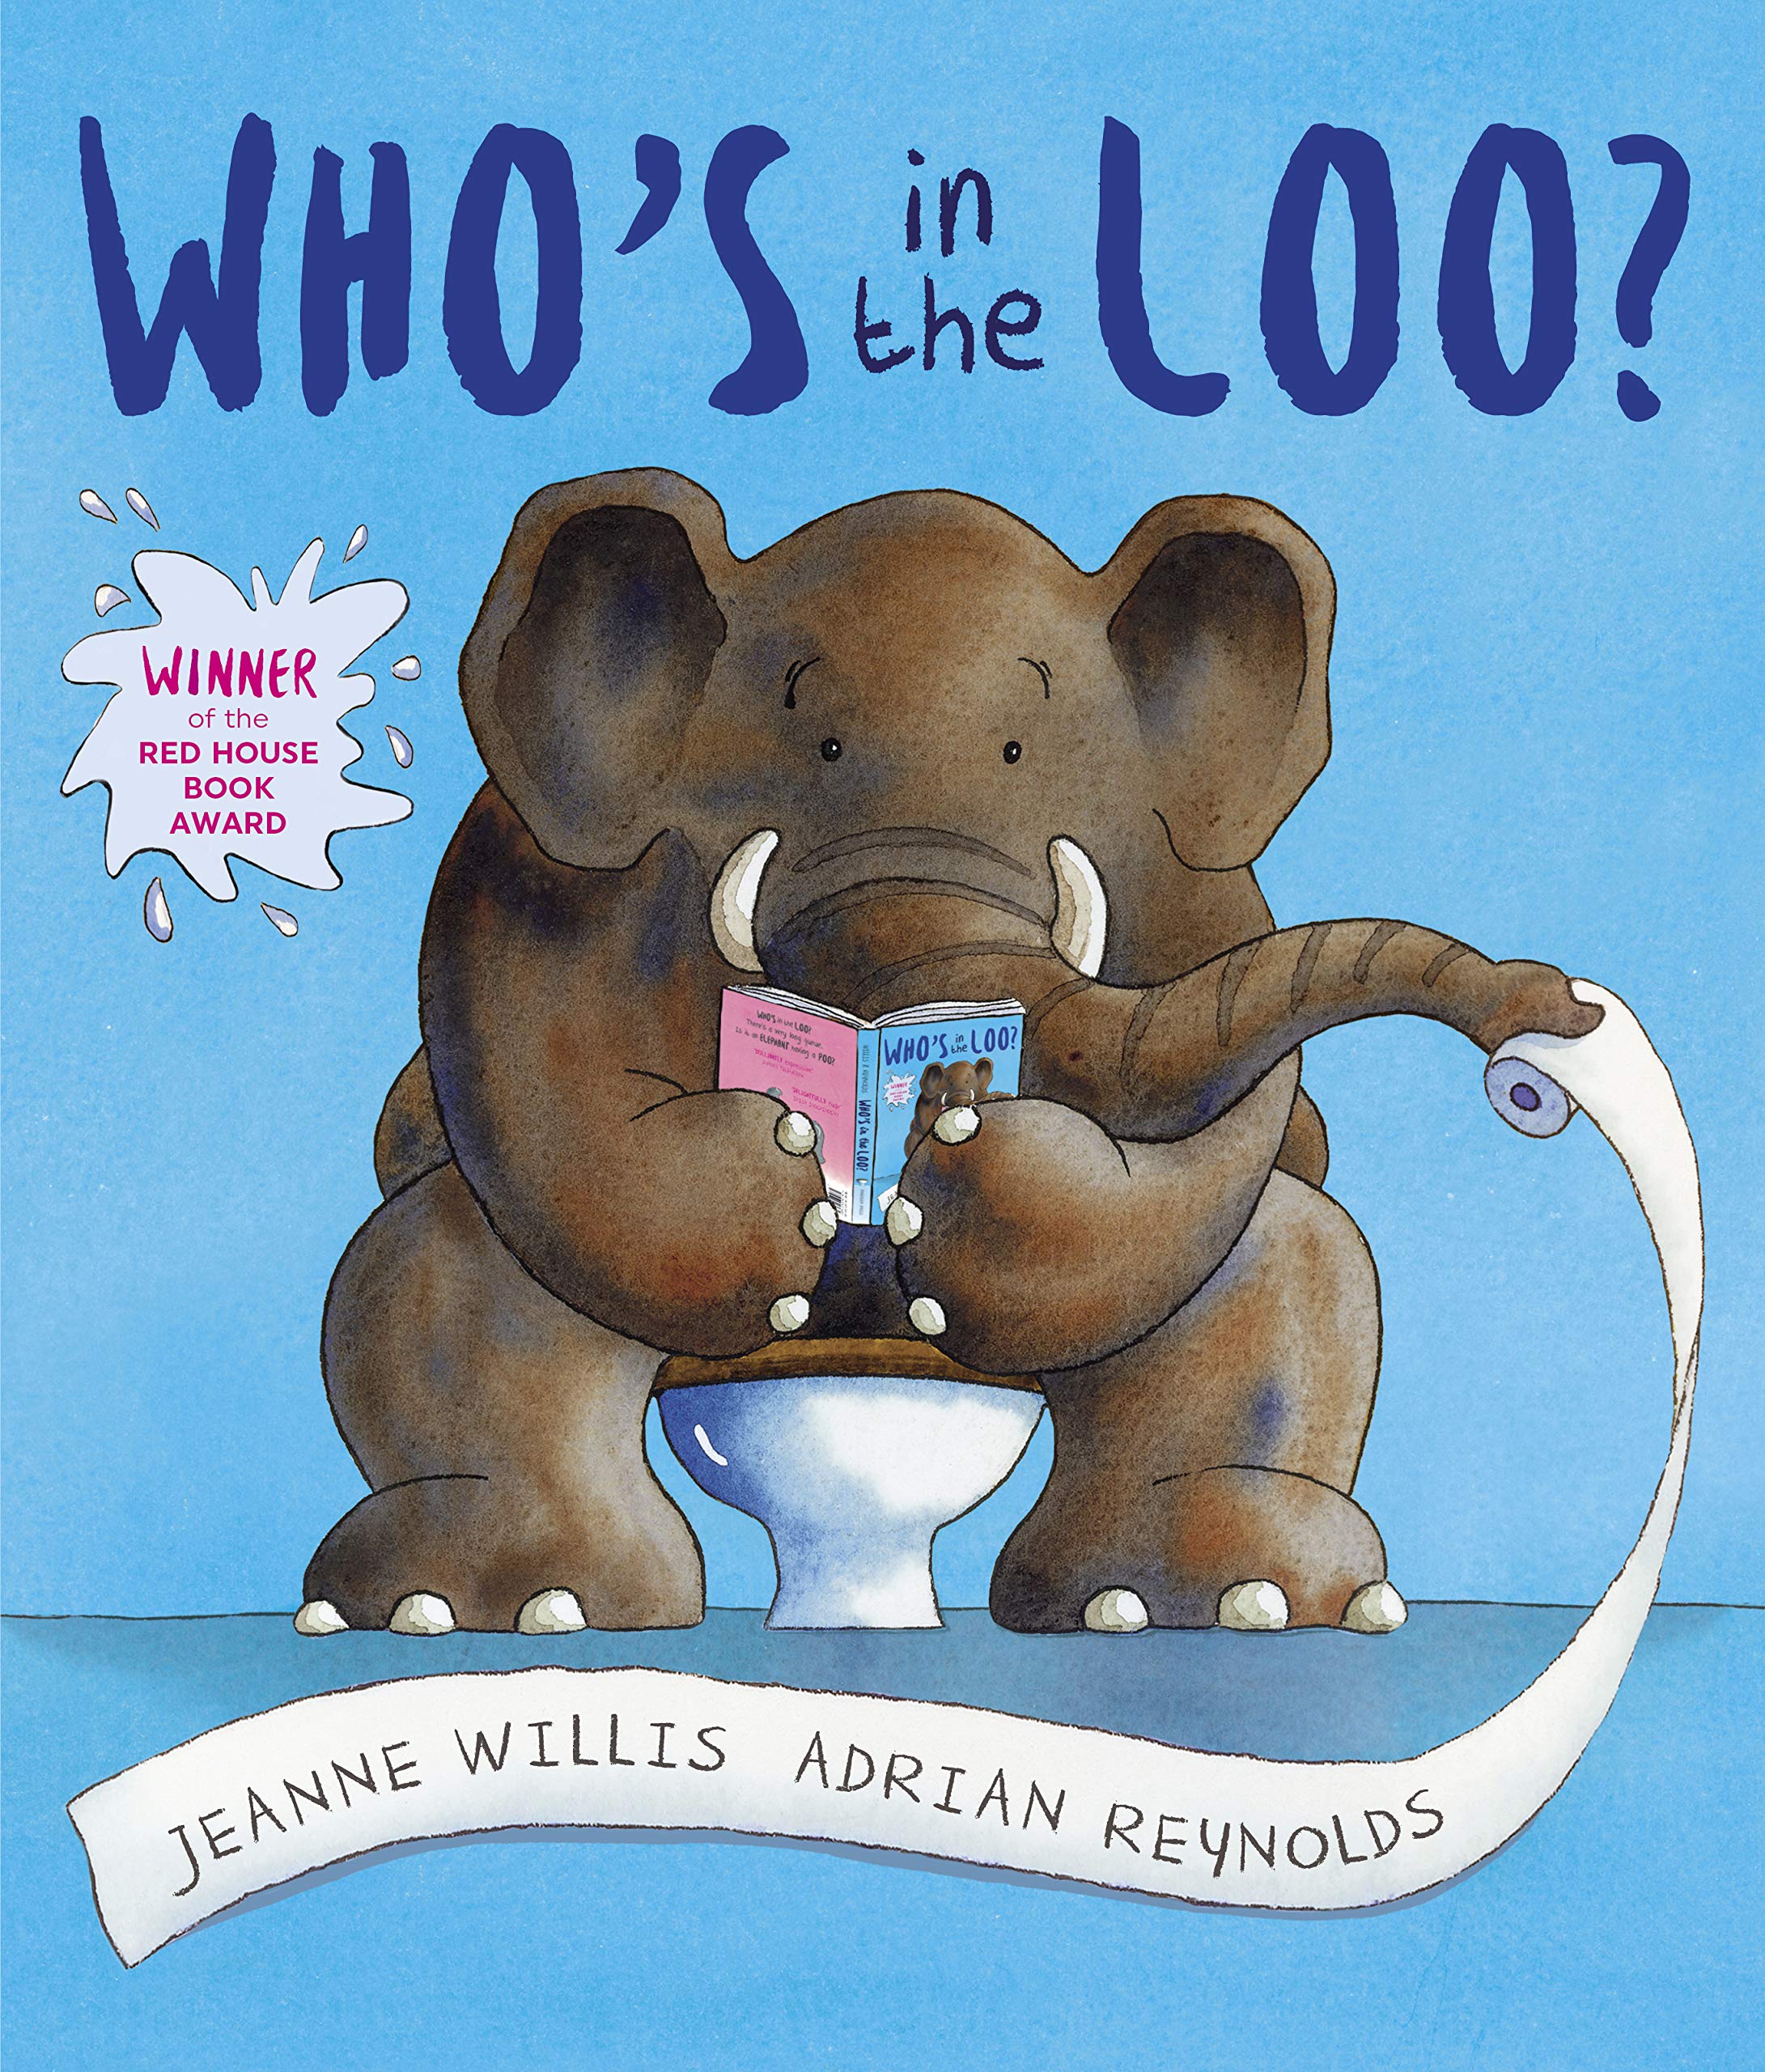 front cover of the book 'who's in the loo?', a potty training book for toddlers